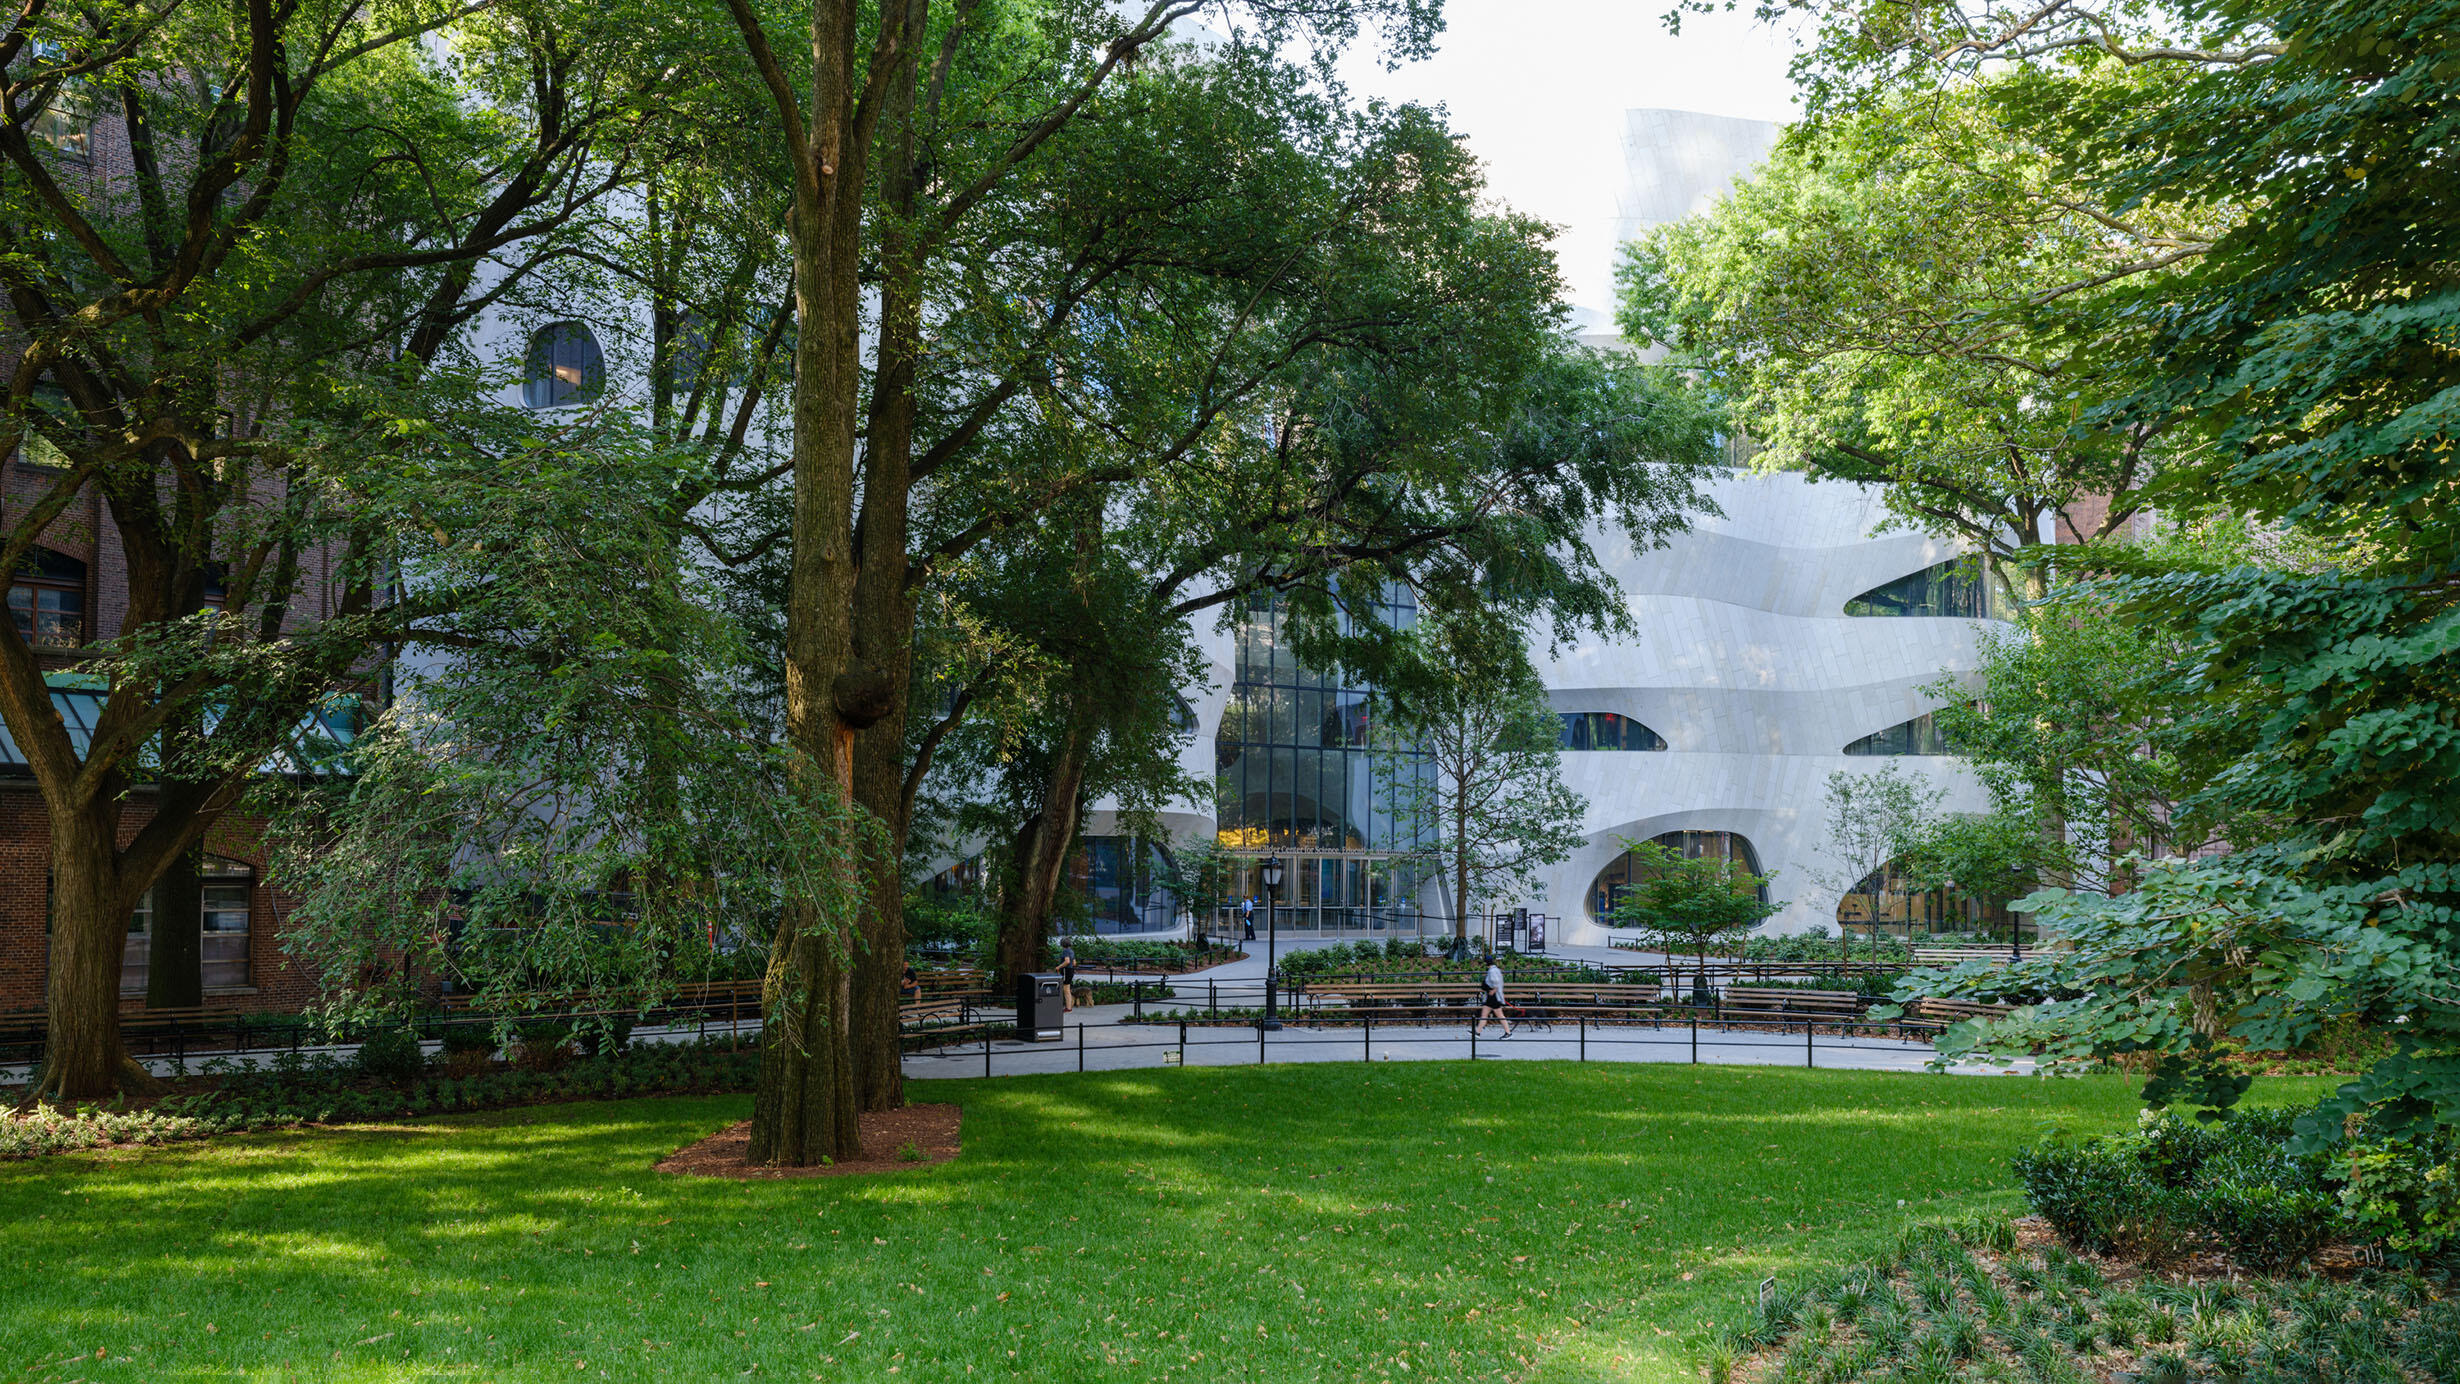 Park with tall trees and an open grassy area, with the Richard Gilder Center facade visible in background.